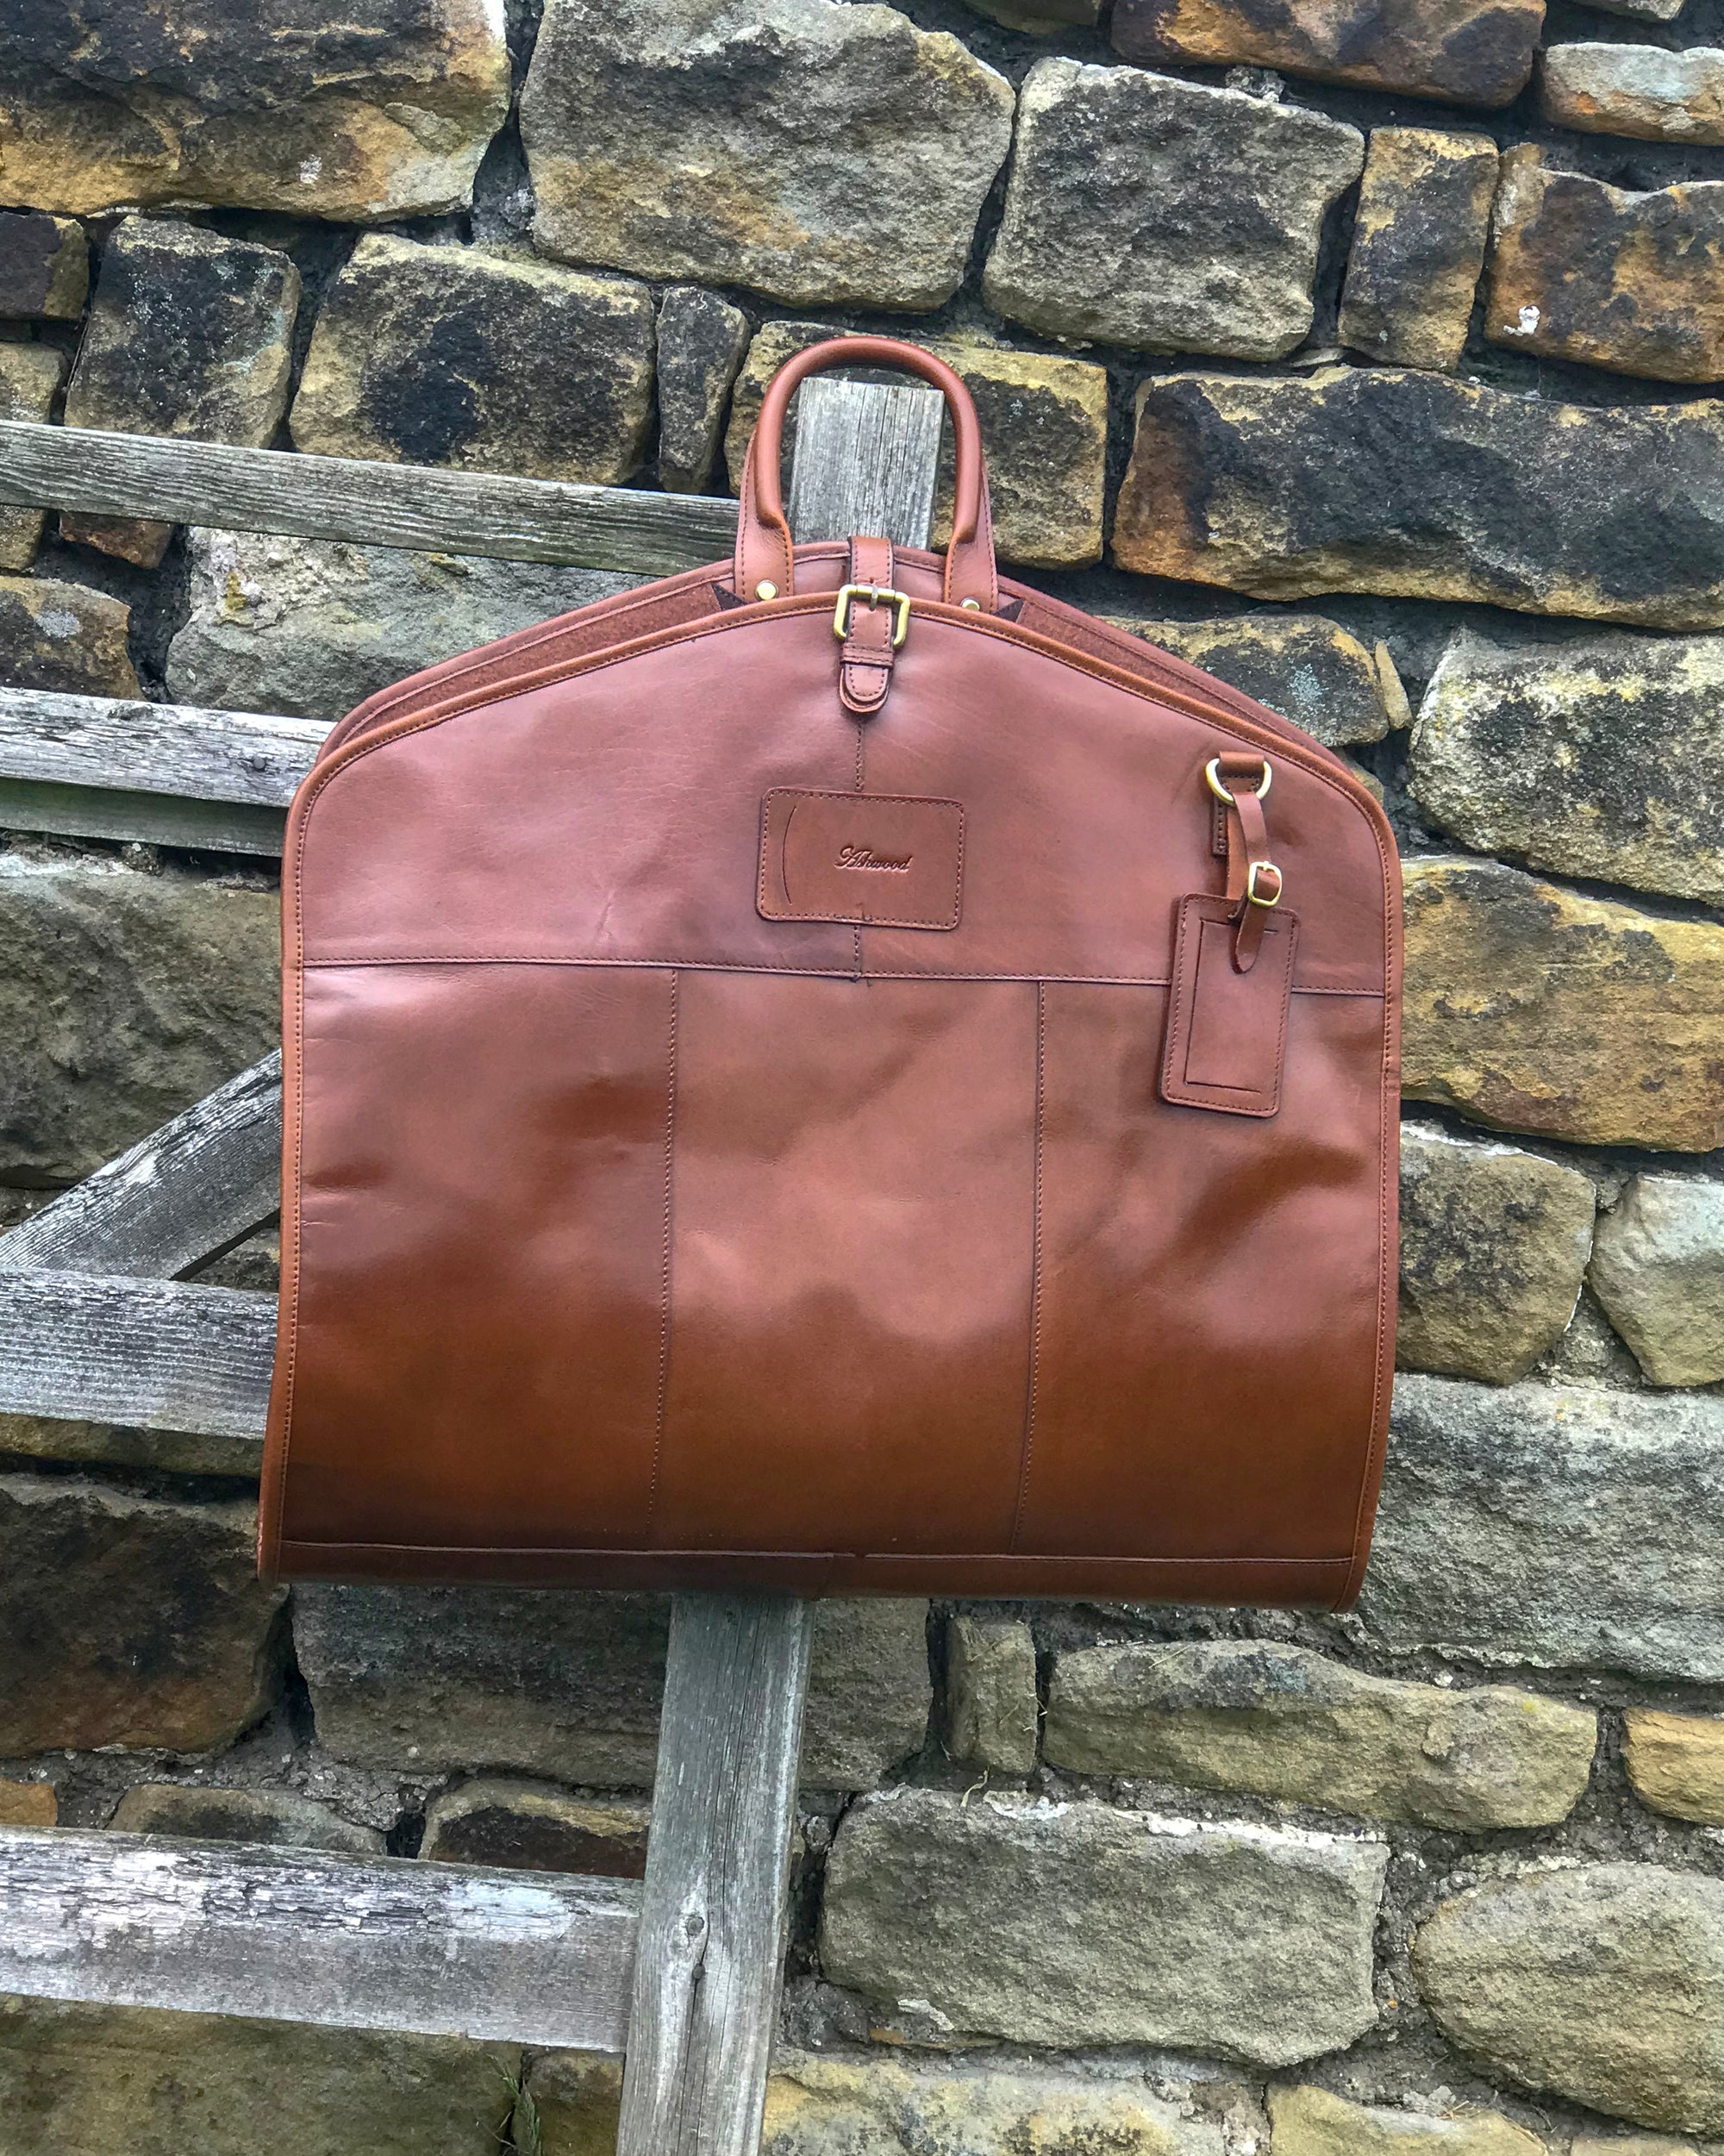 Ashwood chestnut leather Suit Carrier hung up open against stone wall